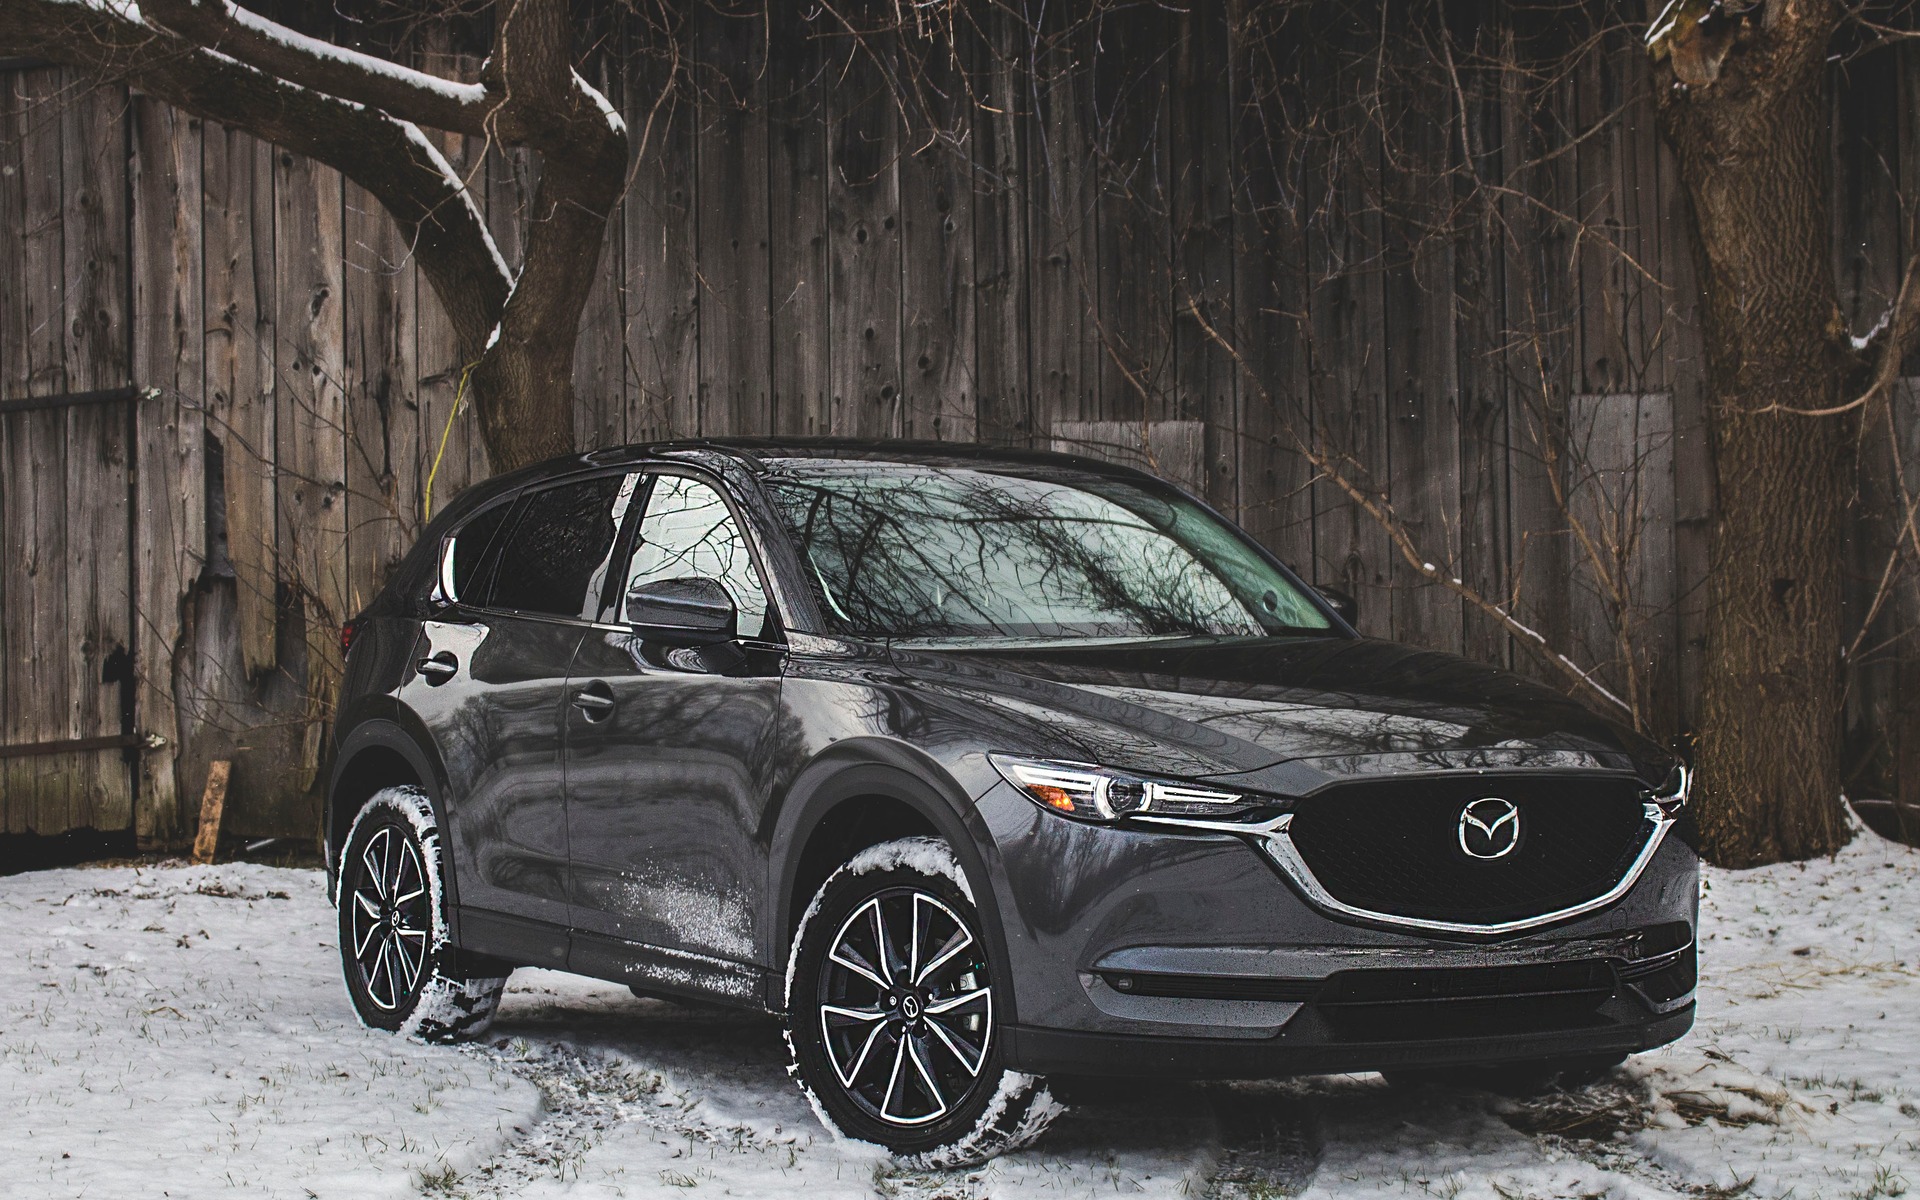 2019 Mazda Cx 5 News Reviews Picture Galleries And Videos